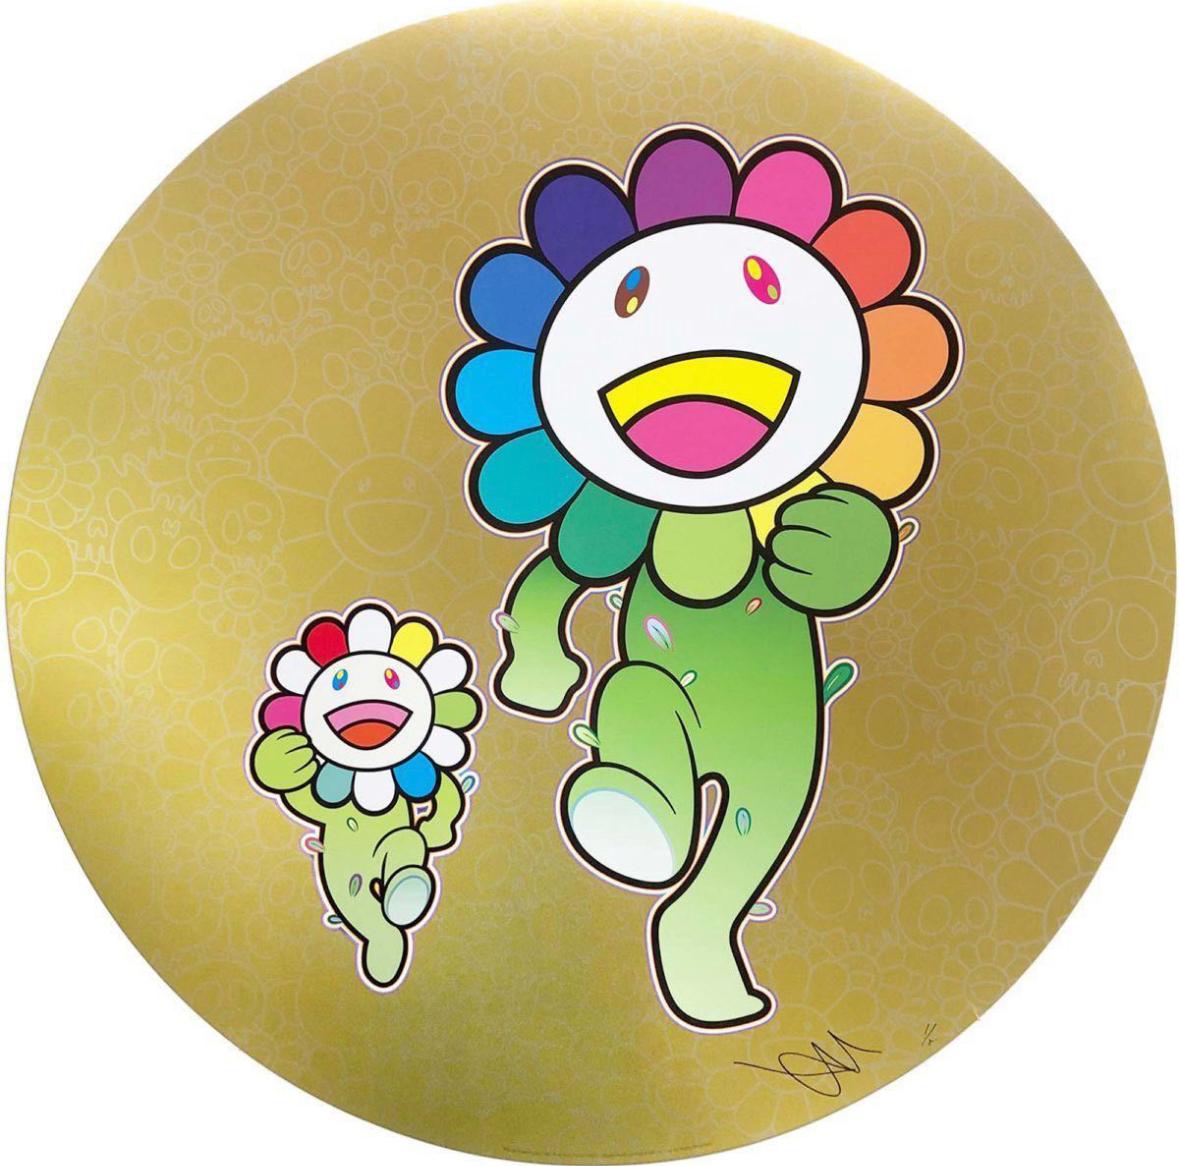 Artist: Takashi Murakami
Title: Flower Parent and Child, Rum Pum Pum!
Year: 2022
Edition: 300
Size: 550 x 550mm
Medium: Offset print, cold stamp and high gloss varnishing

This is hand signed by Takashi Murakami.

Note: This will be shipped from